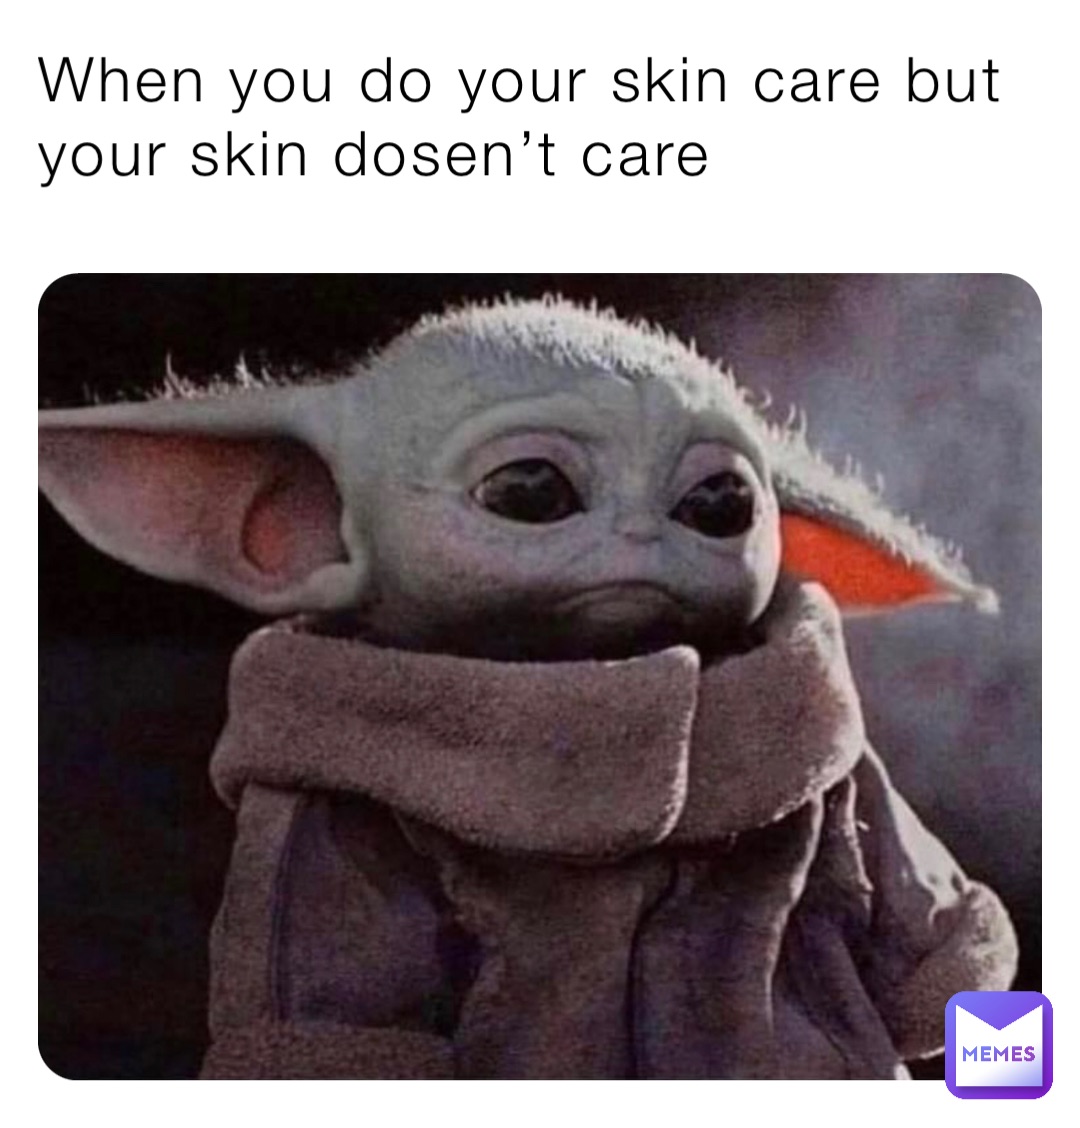 When you do your skin care but your skin dosen’t care